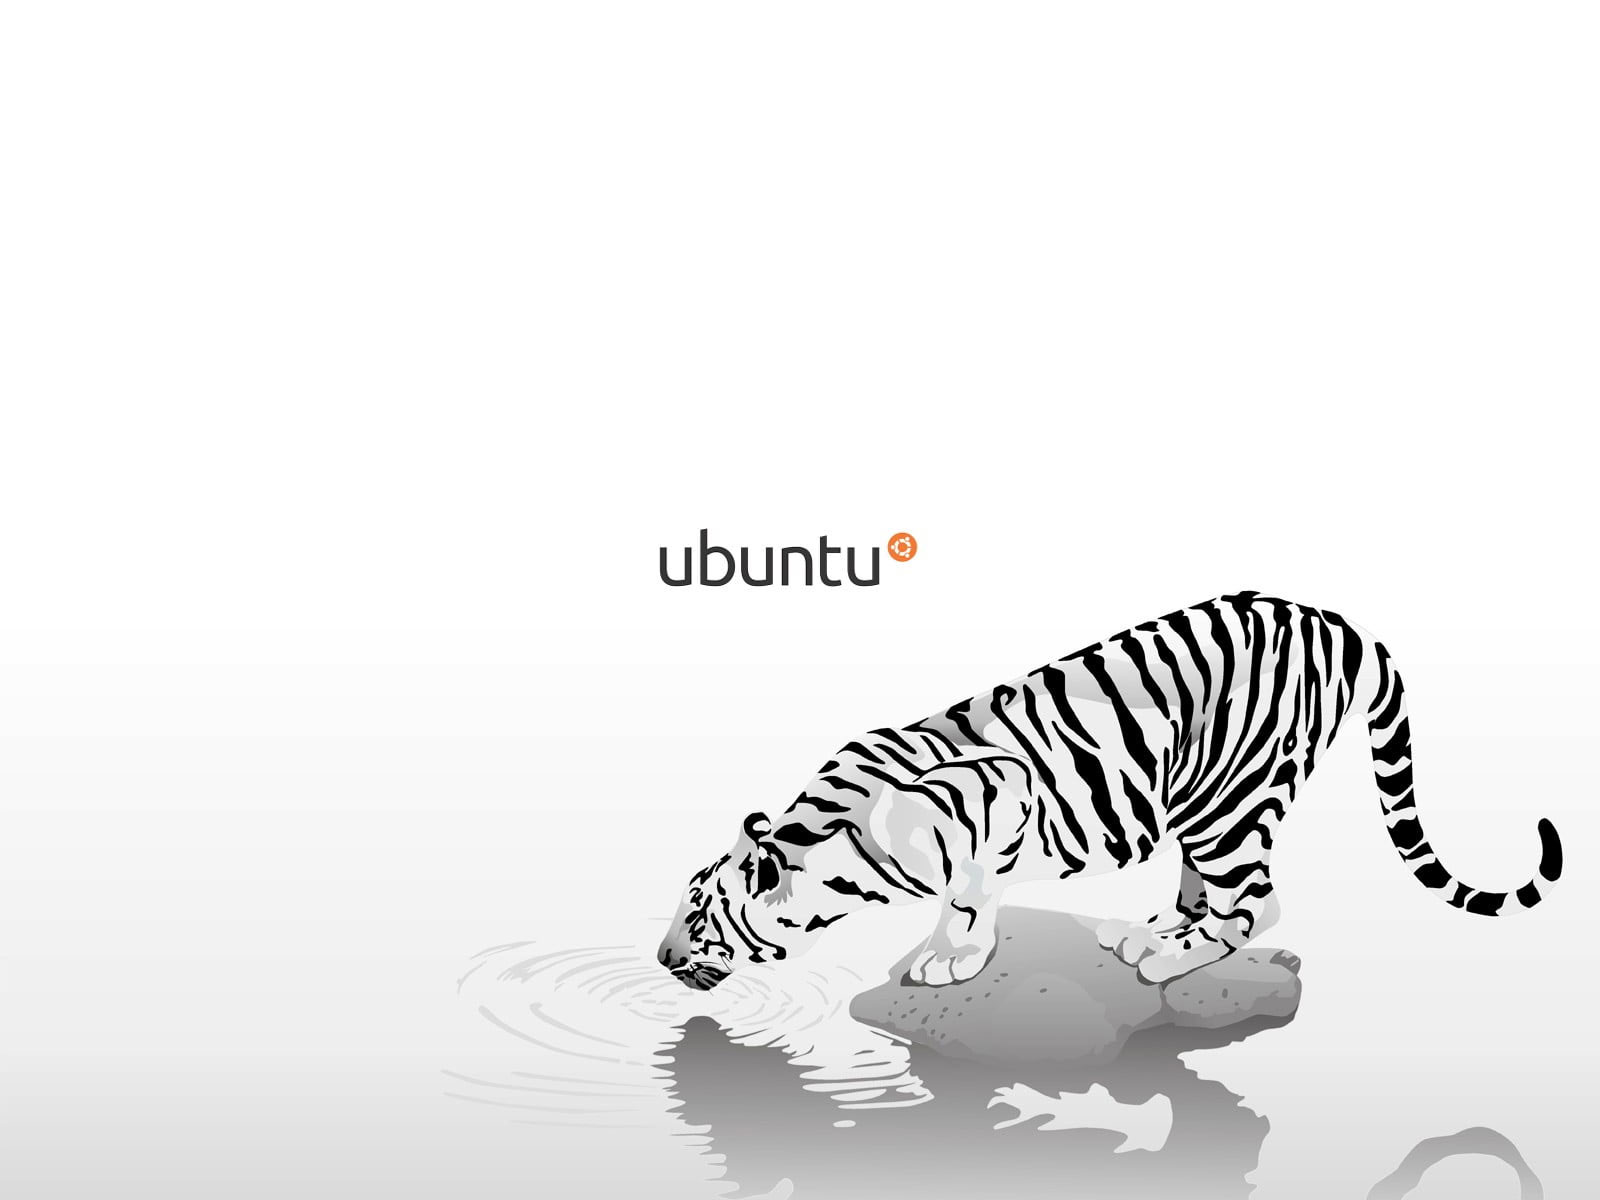 The White Tiger 2021 Wallpapers